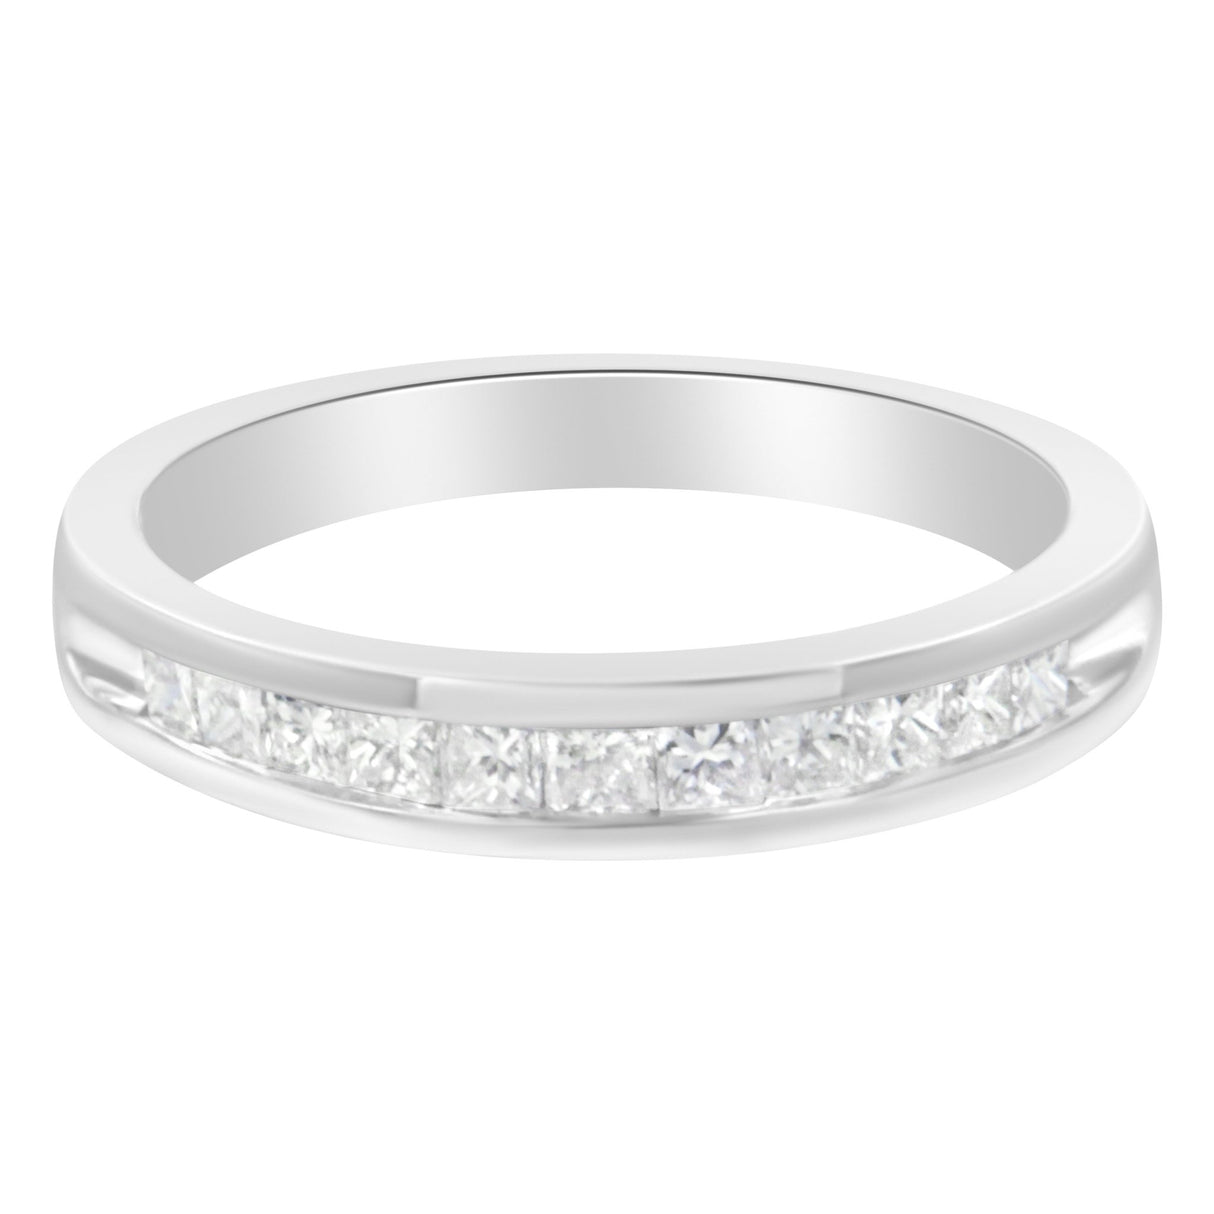 .925 Sterling Silver 1/2 Cttw Princess-Cut Diamond Channel-Set Half-Eternity Wedding Or Anniversary Band Ring (H-I Color, I2 Clarity) - Size 6 - Tuesday Morning-Rings